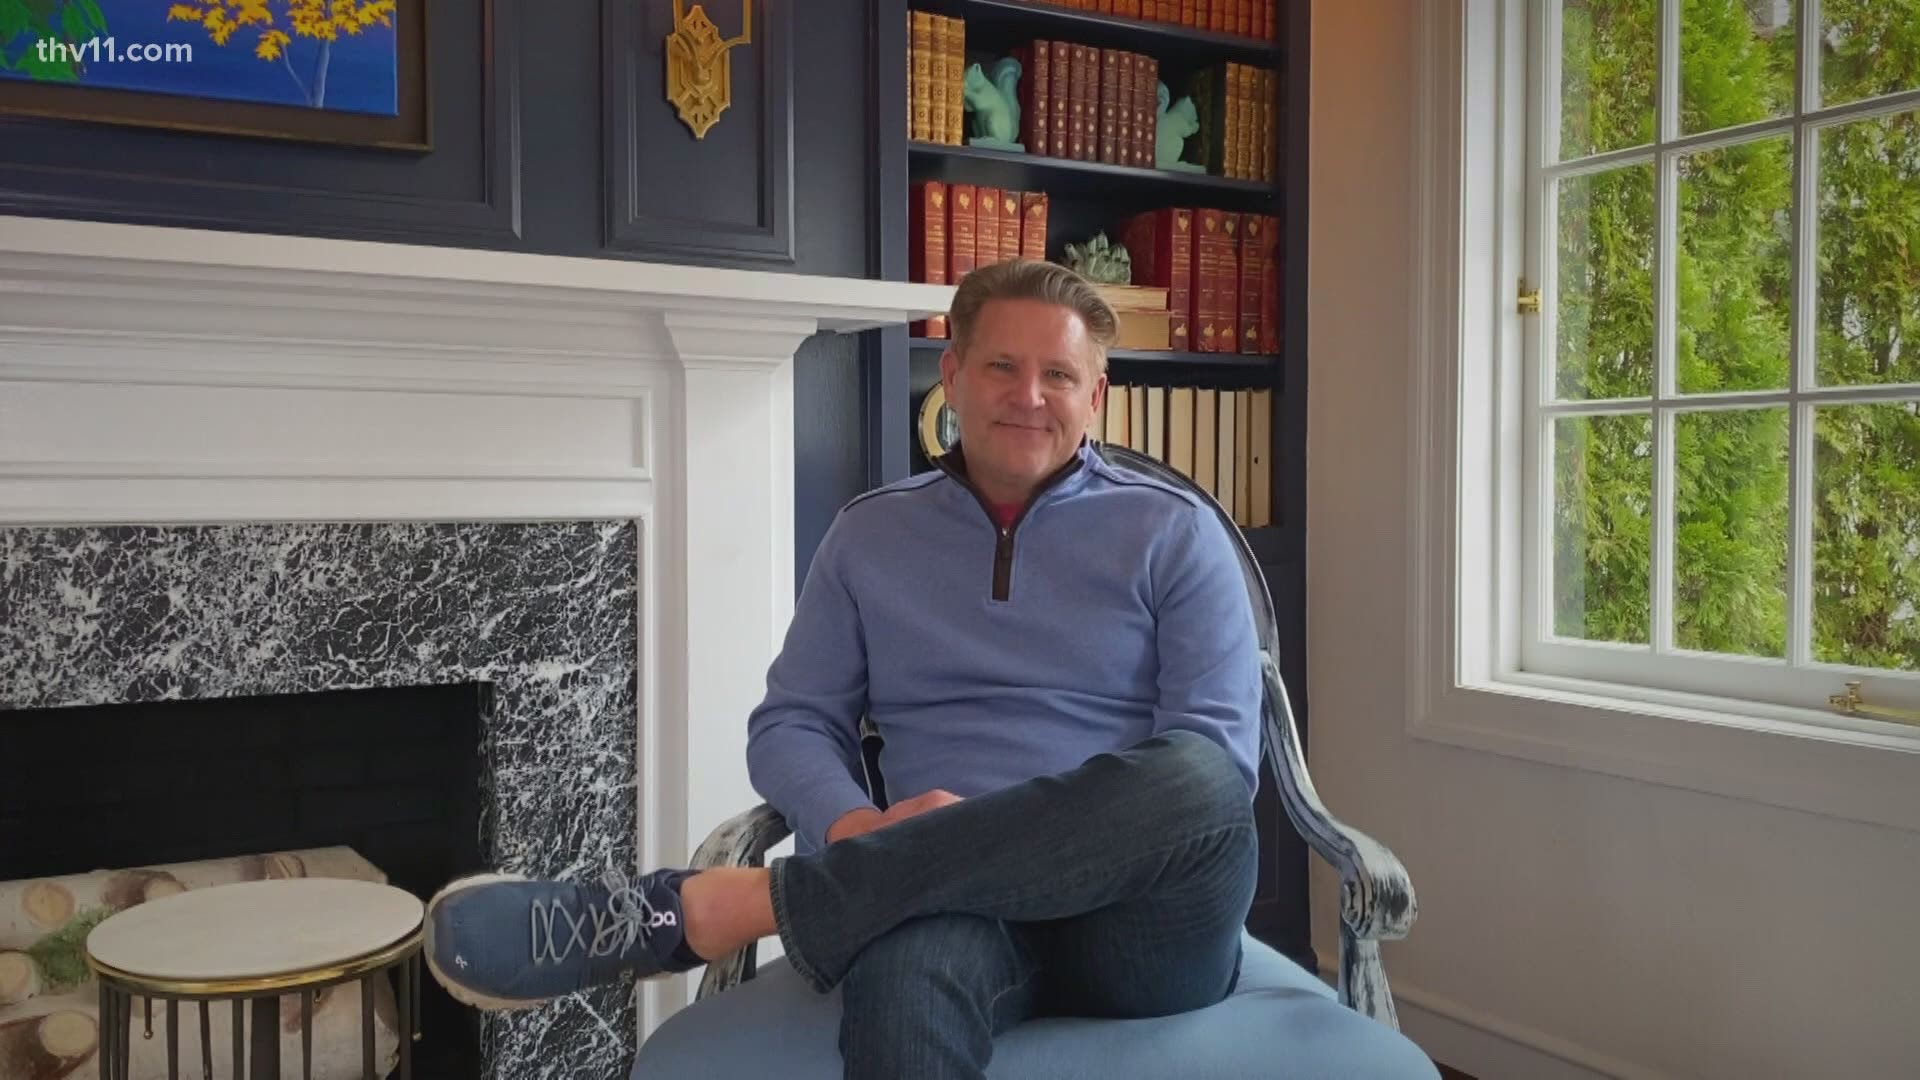 Chris H. Olsen shares tips on how to redecorate a room in your home in a unique and elegant way.